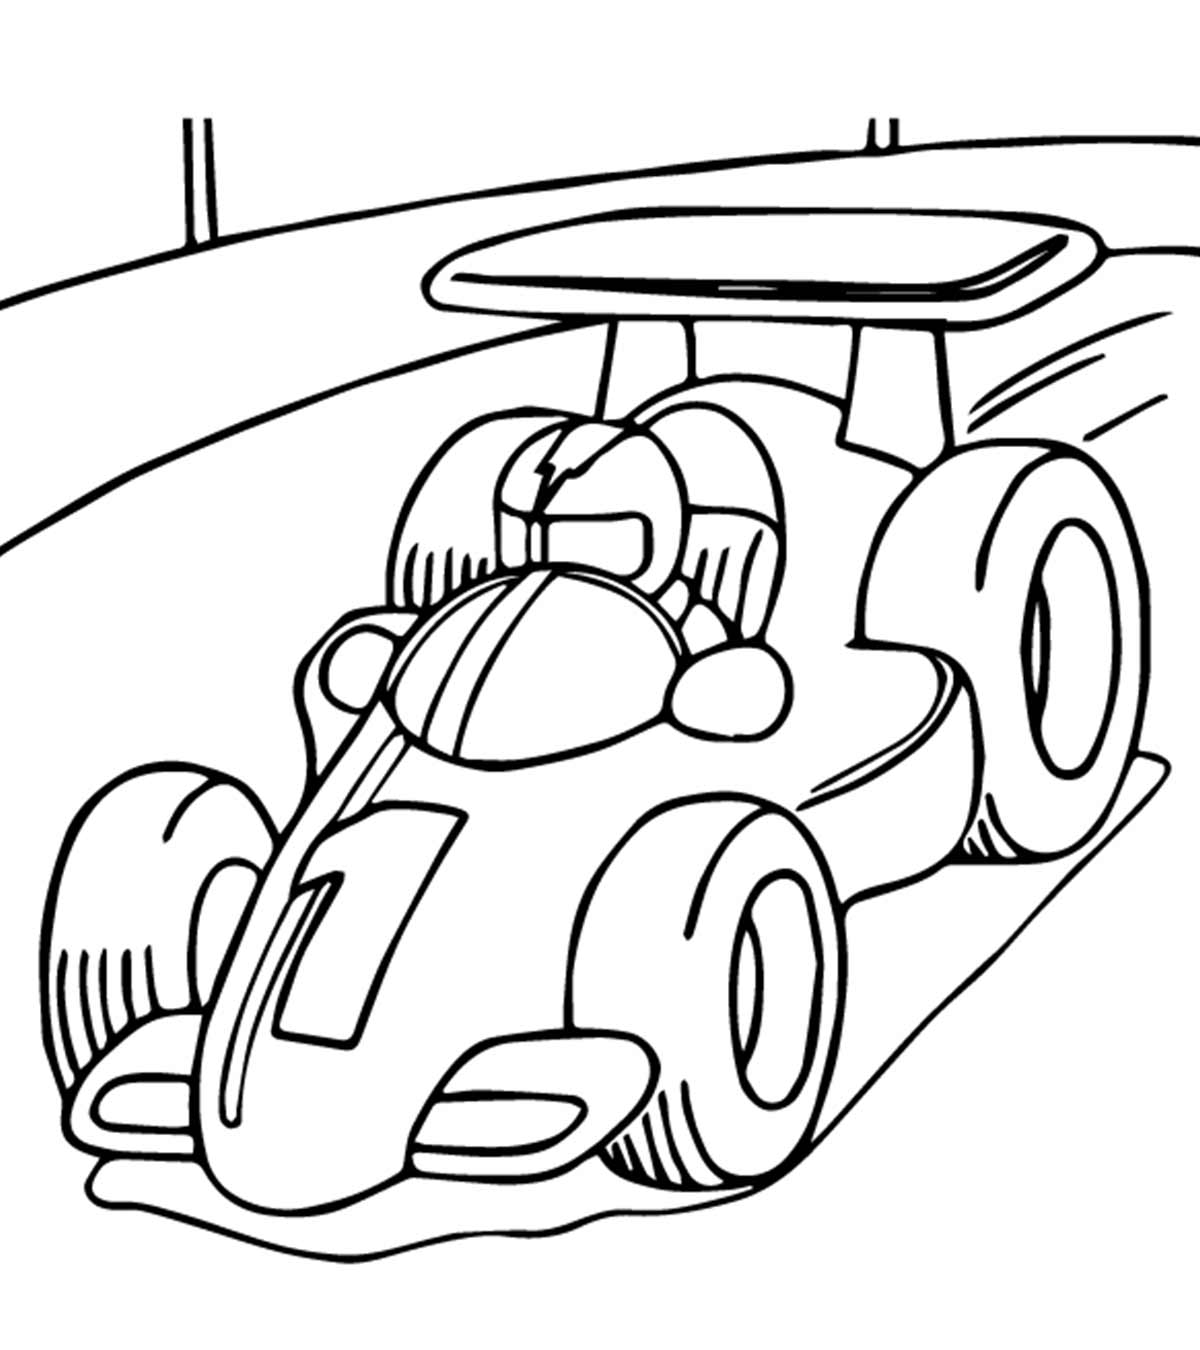 Top 25 Race Car Coloring Pages For Your Little Ones_image